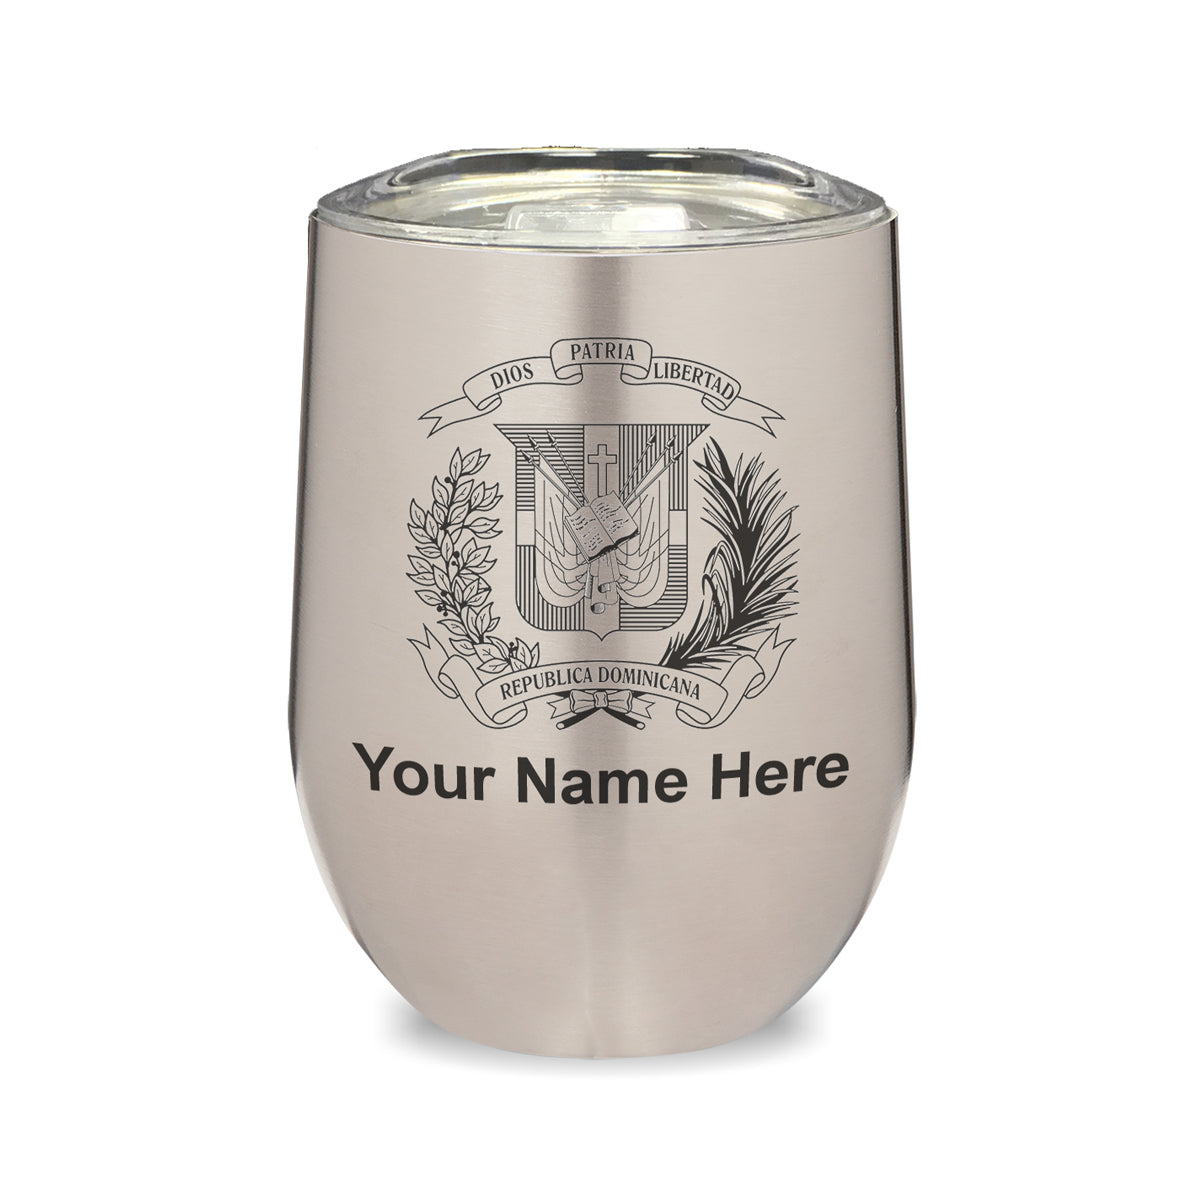 LaserGram Double Wall Stainless Steel Wine Glass, Coat of Arms Dominican Republic, Personalized Engraving Included